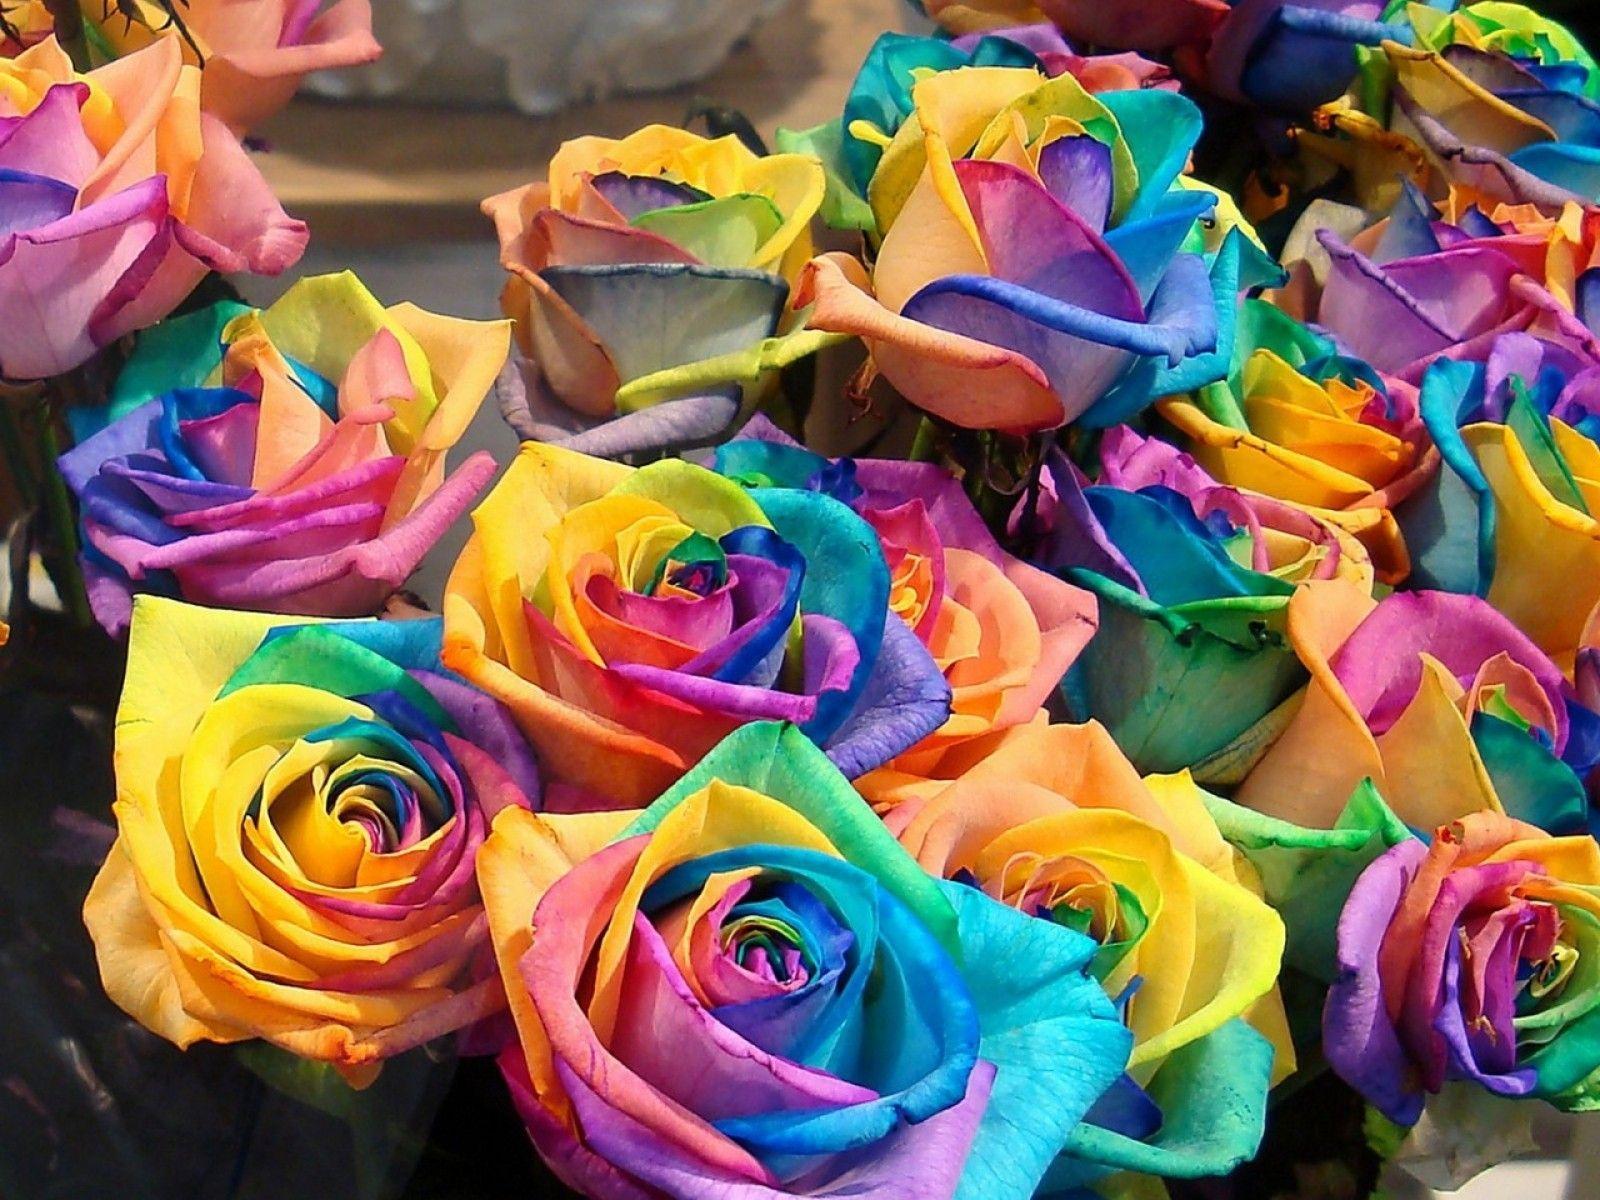 Rainbow Roses. HD Flowers Wallpaper for Mobile and Desktop